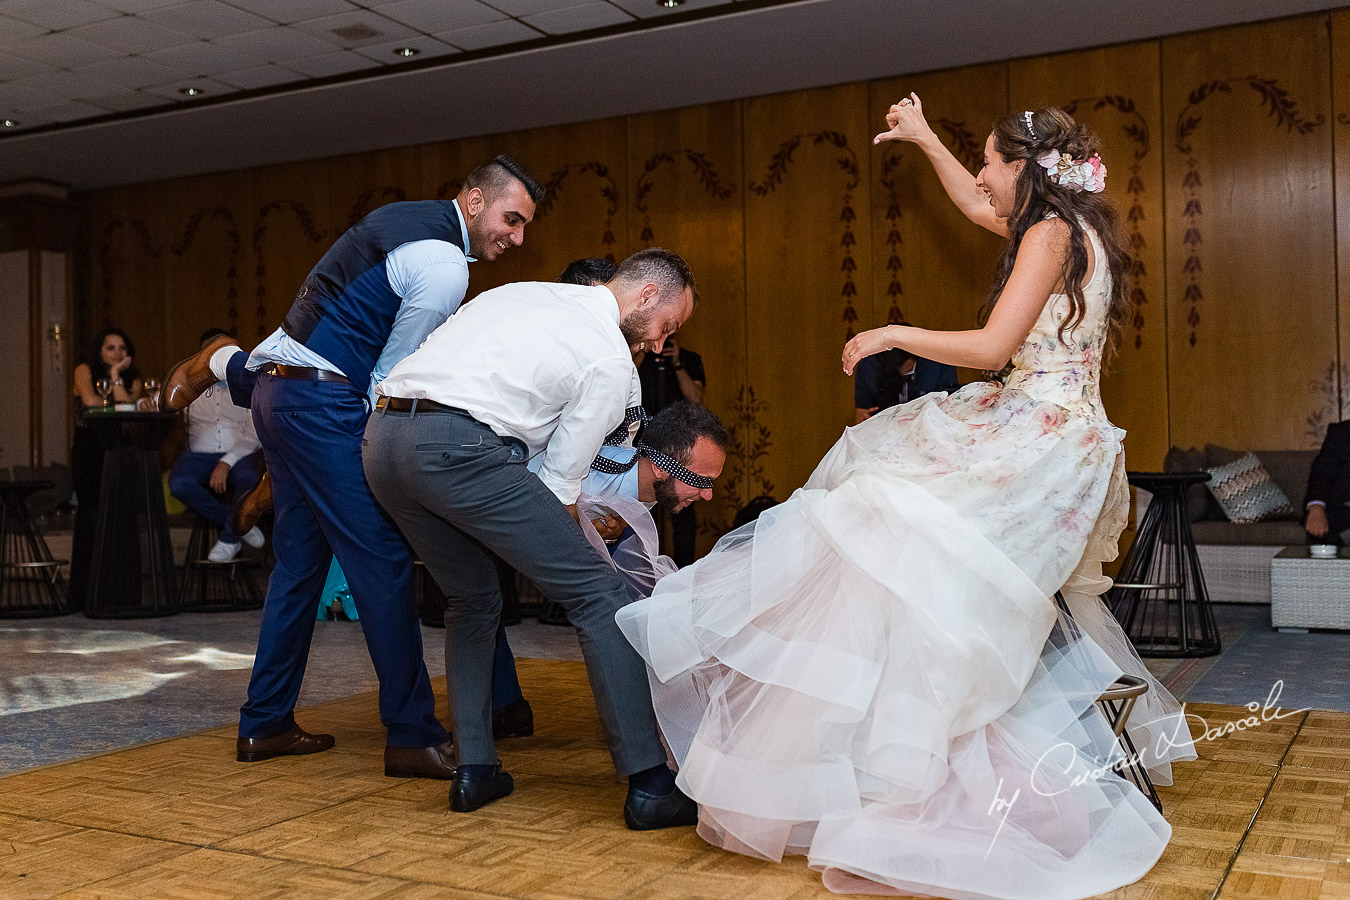 Moment when the groom is prepared for the garter photographed as part of an Exclusive Wedding photography at Grand Resort Limassol, captured by Cyprus Wedding Photographer Cristian Dascalu.